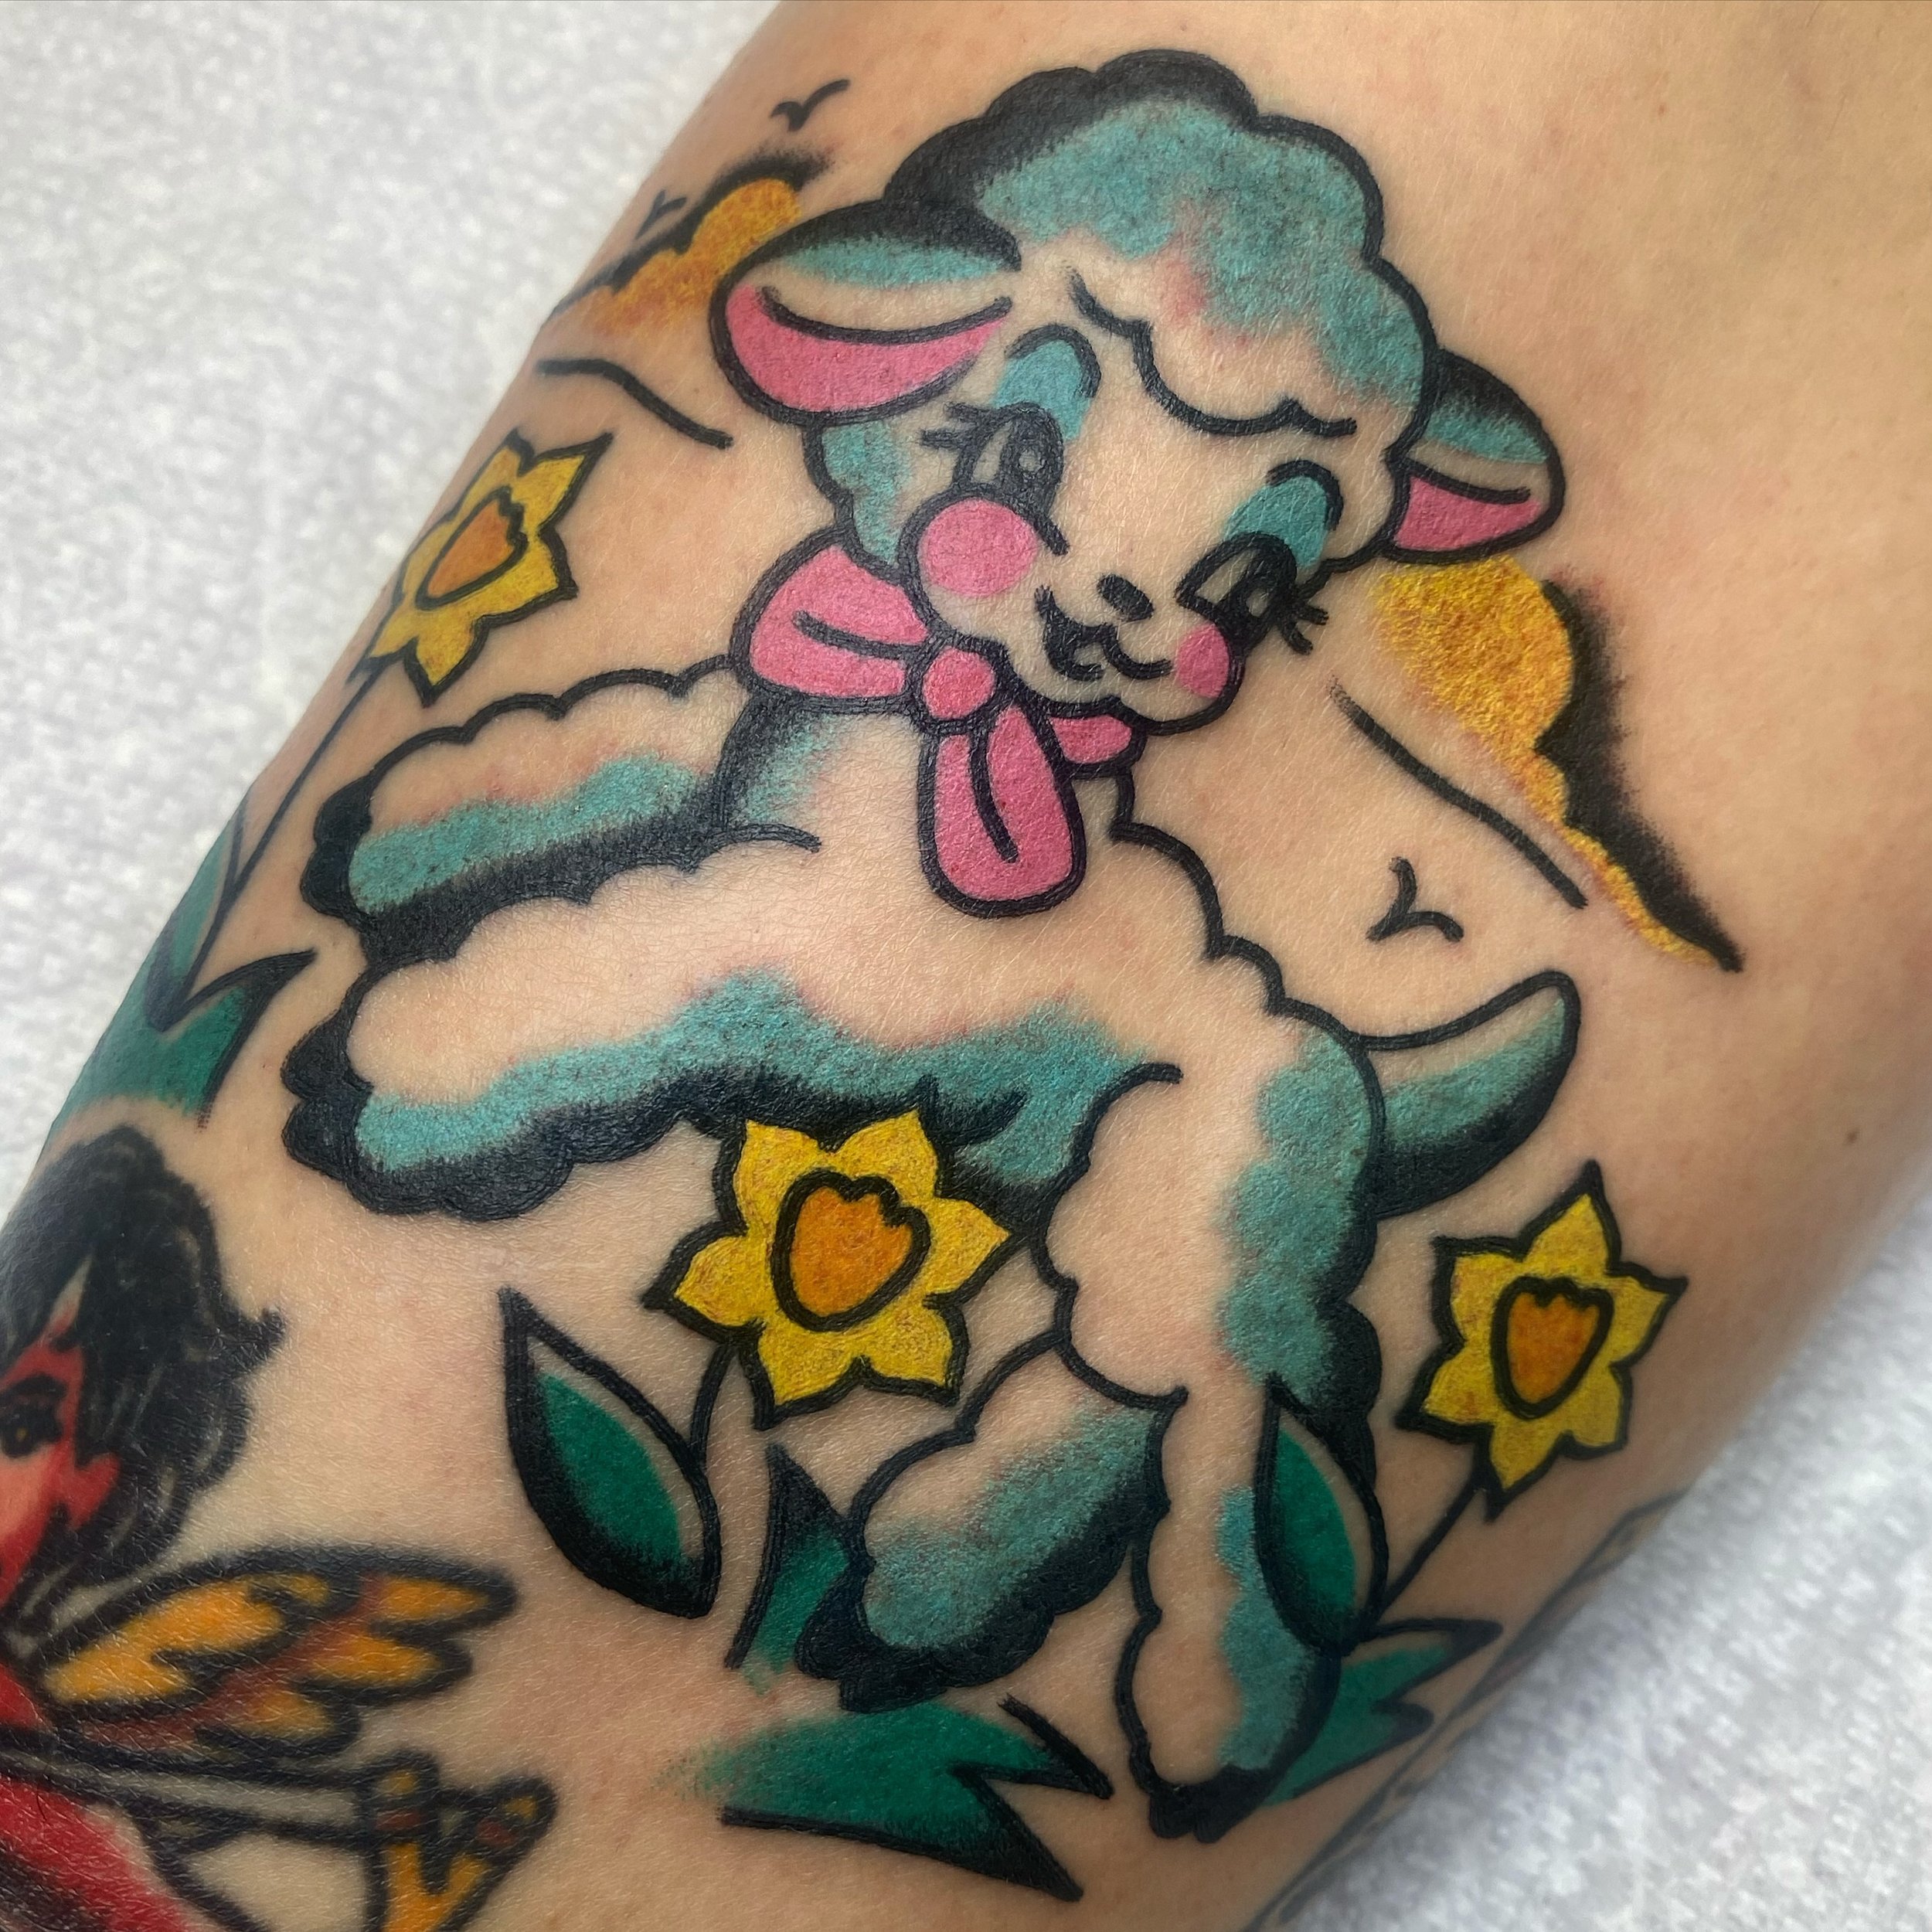 lamb for @lucky_signs 🐑🌷
go check her sign painting out 🔥🔥🔥
❤️ books open / walk ins thurs-mon
📍@downtowntattoolasvegas
🔗 check &lsquo;booking&rsquo; highlight to book in
‼️check spam for reply

UPCOMING GUEST SPOTS + EVENTS :

✨PHOENIX, AZ
Ma